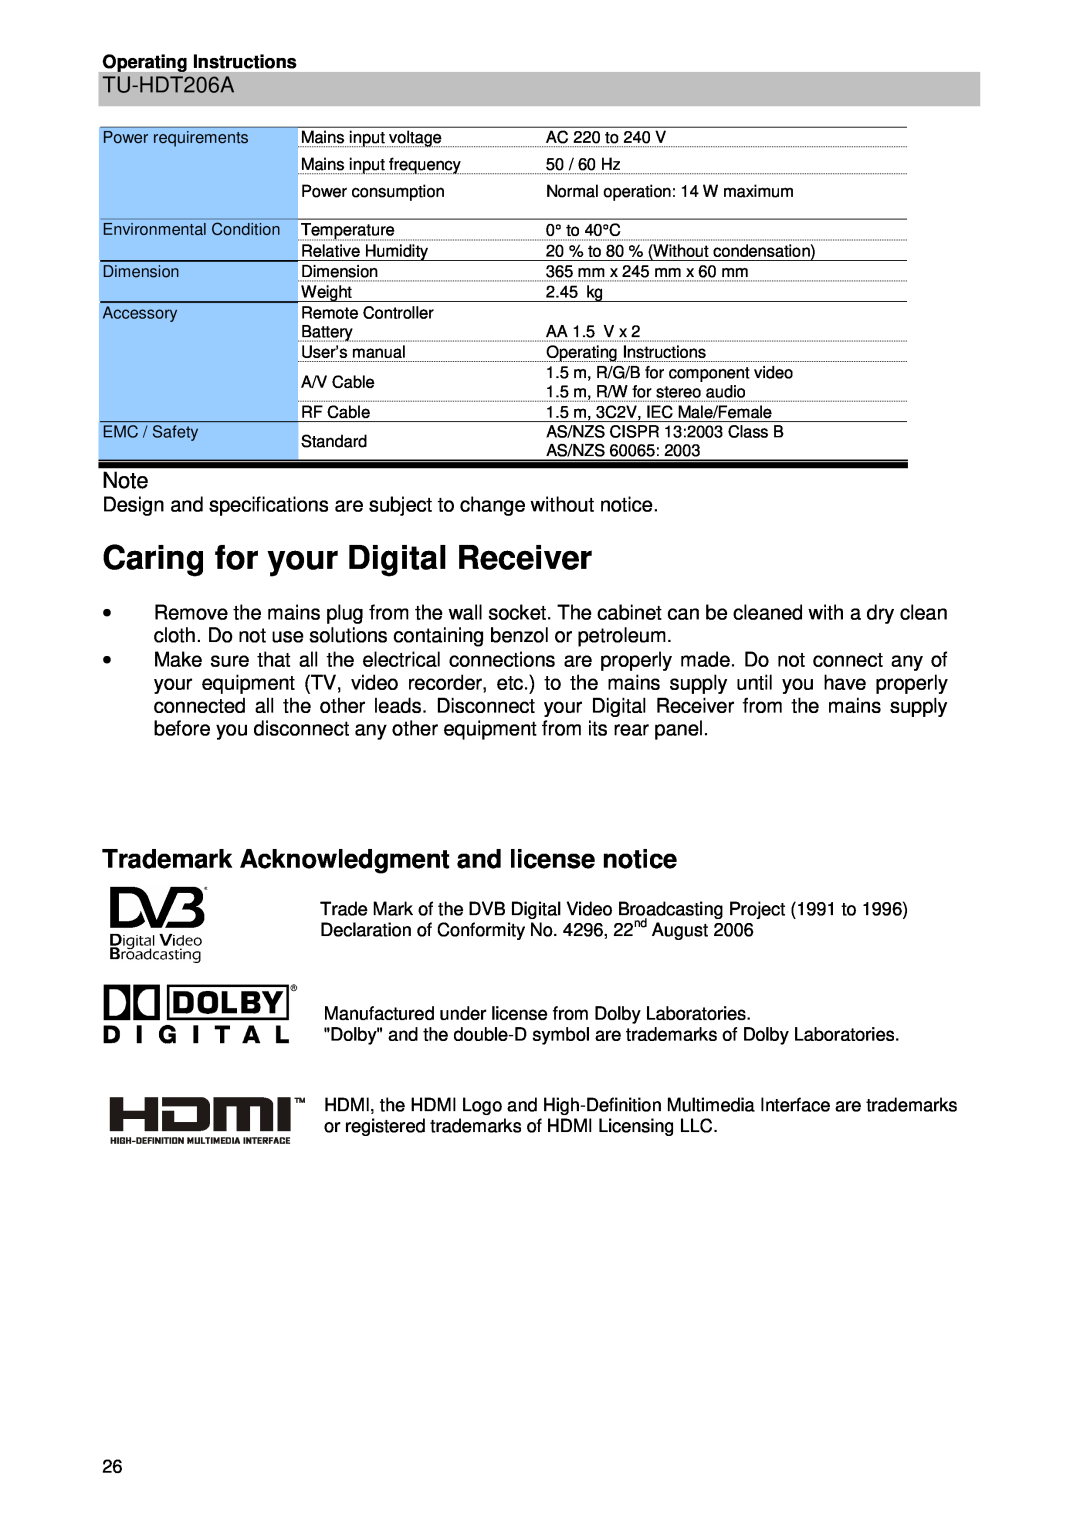 Panasonic TU-HDT206A manual Caring for your Digital Receiver, Trademark Acknowledgment and license notice 